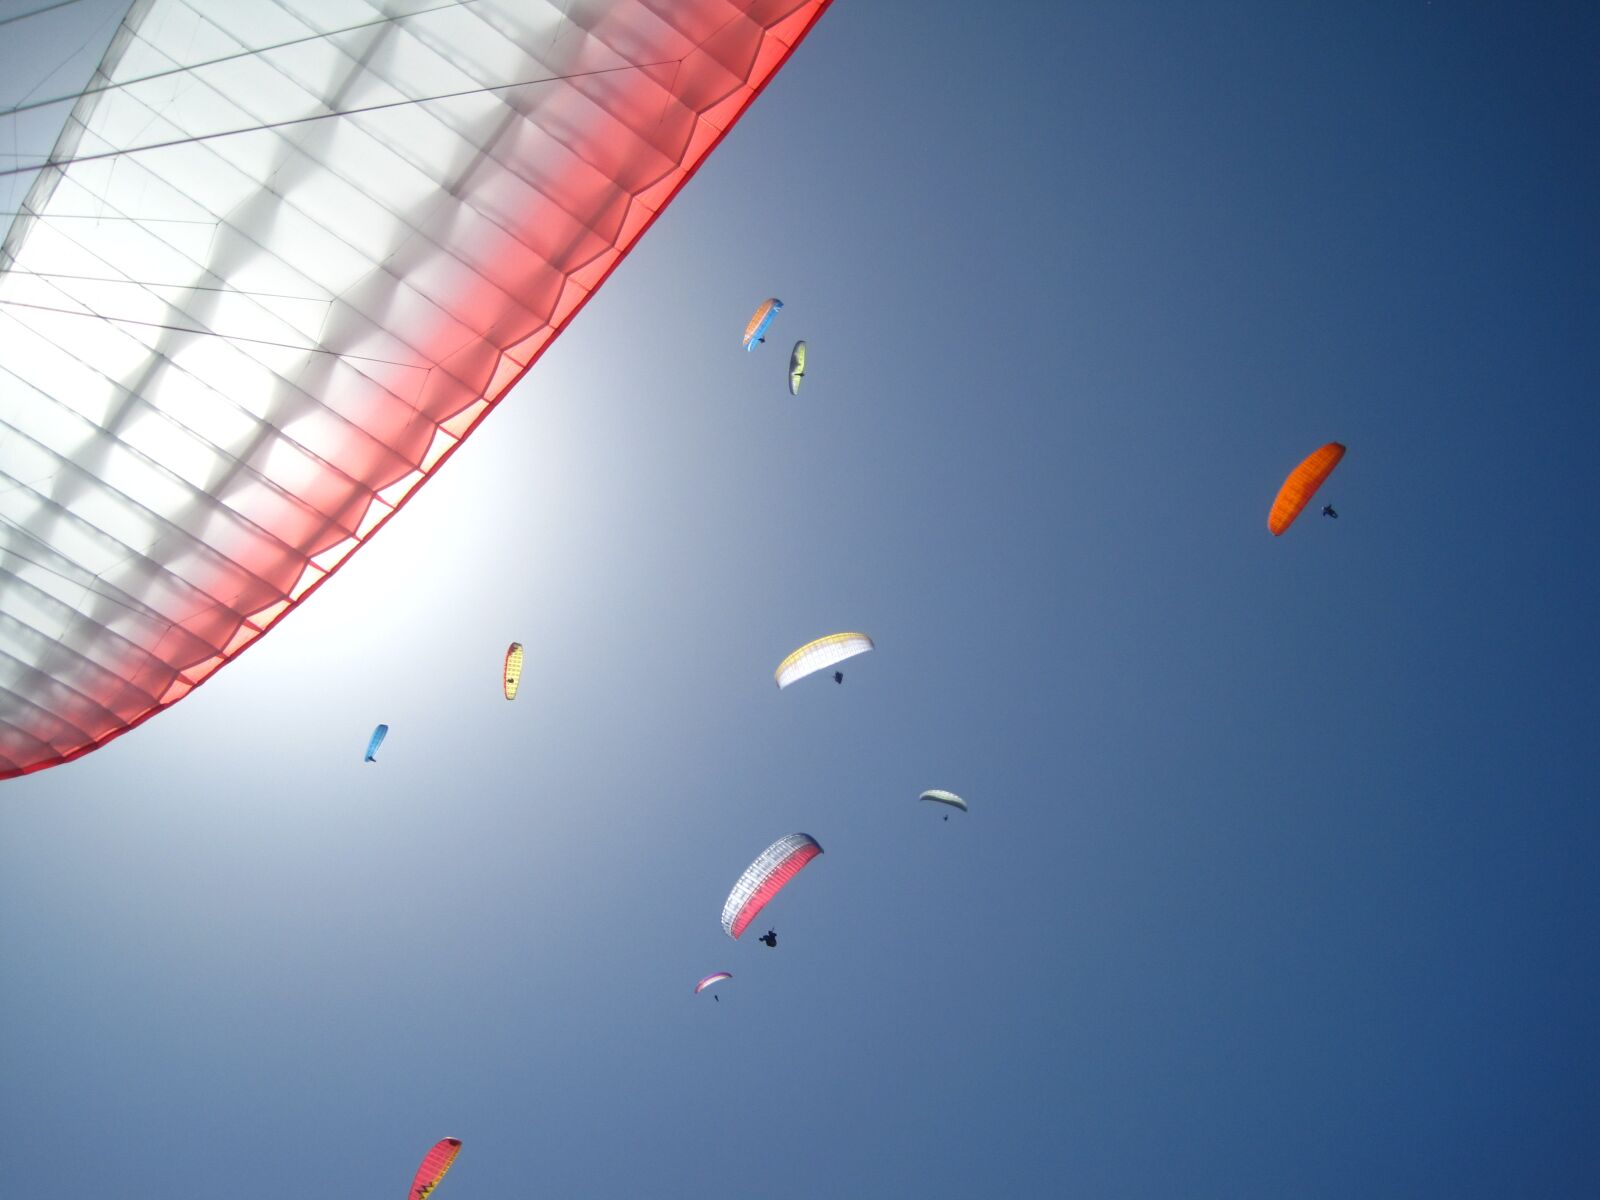 Canon PowerShot SD1200 IS (Digital IXUS 95 IS / IXY Digital 110 IS) sample photo. Paragliding, sky, freedom photography